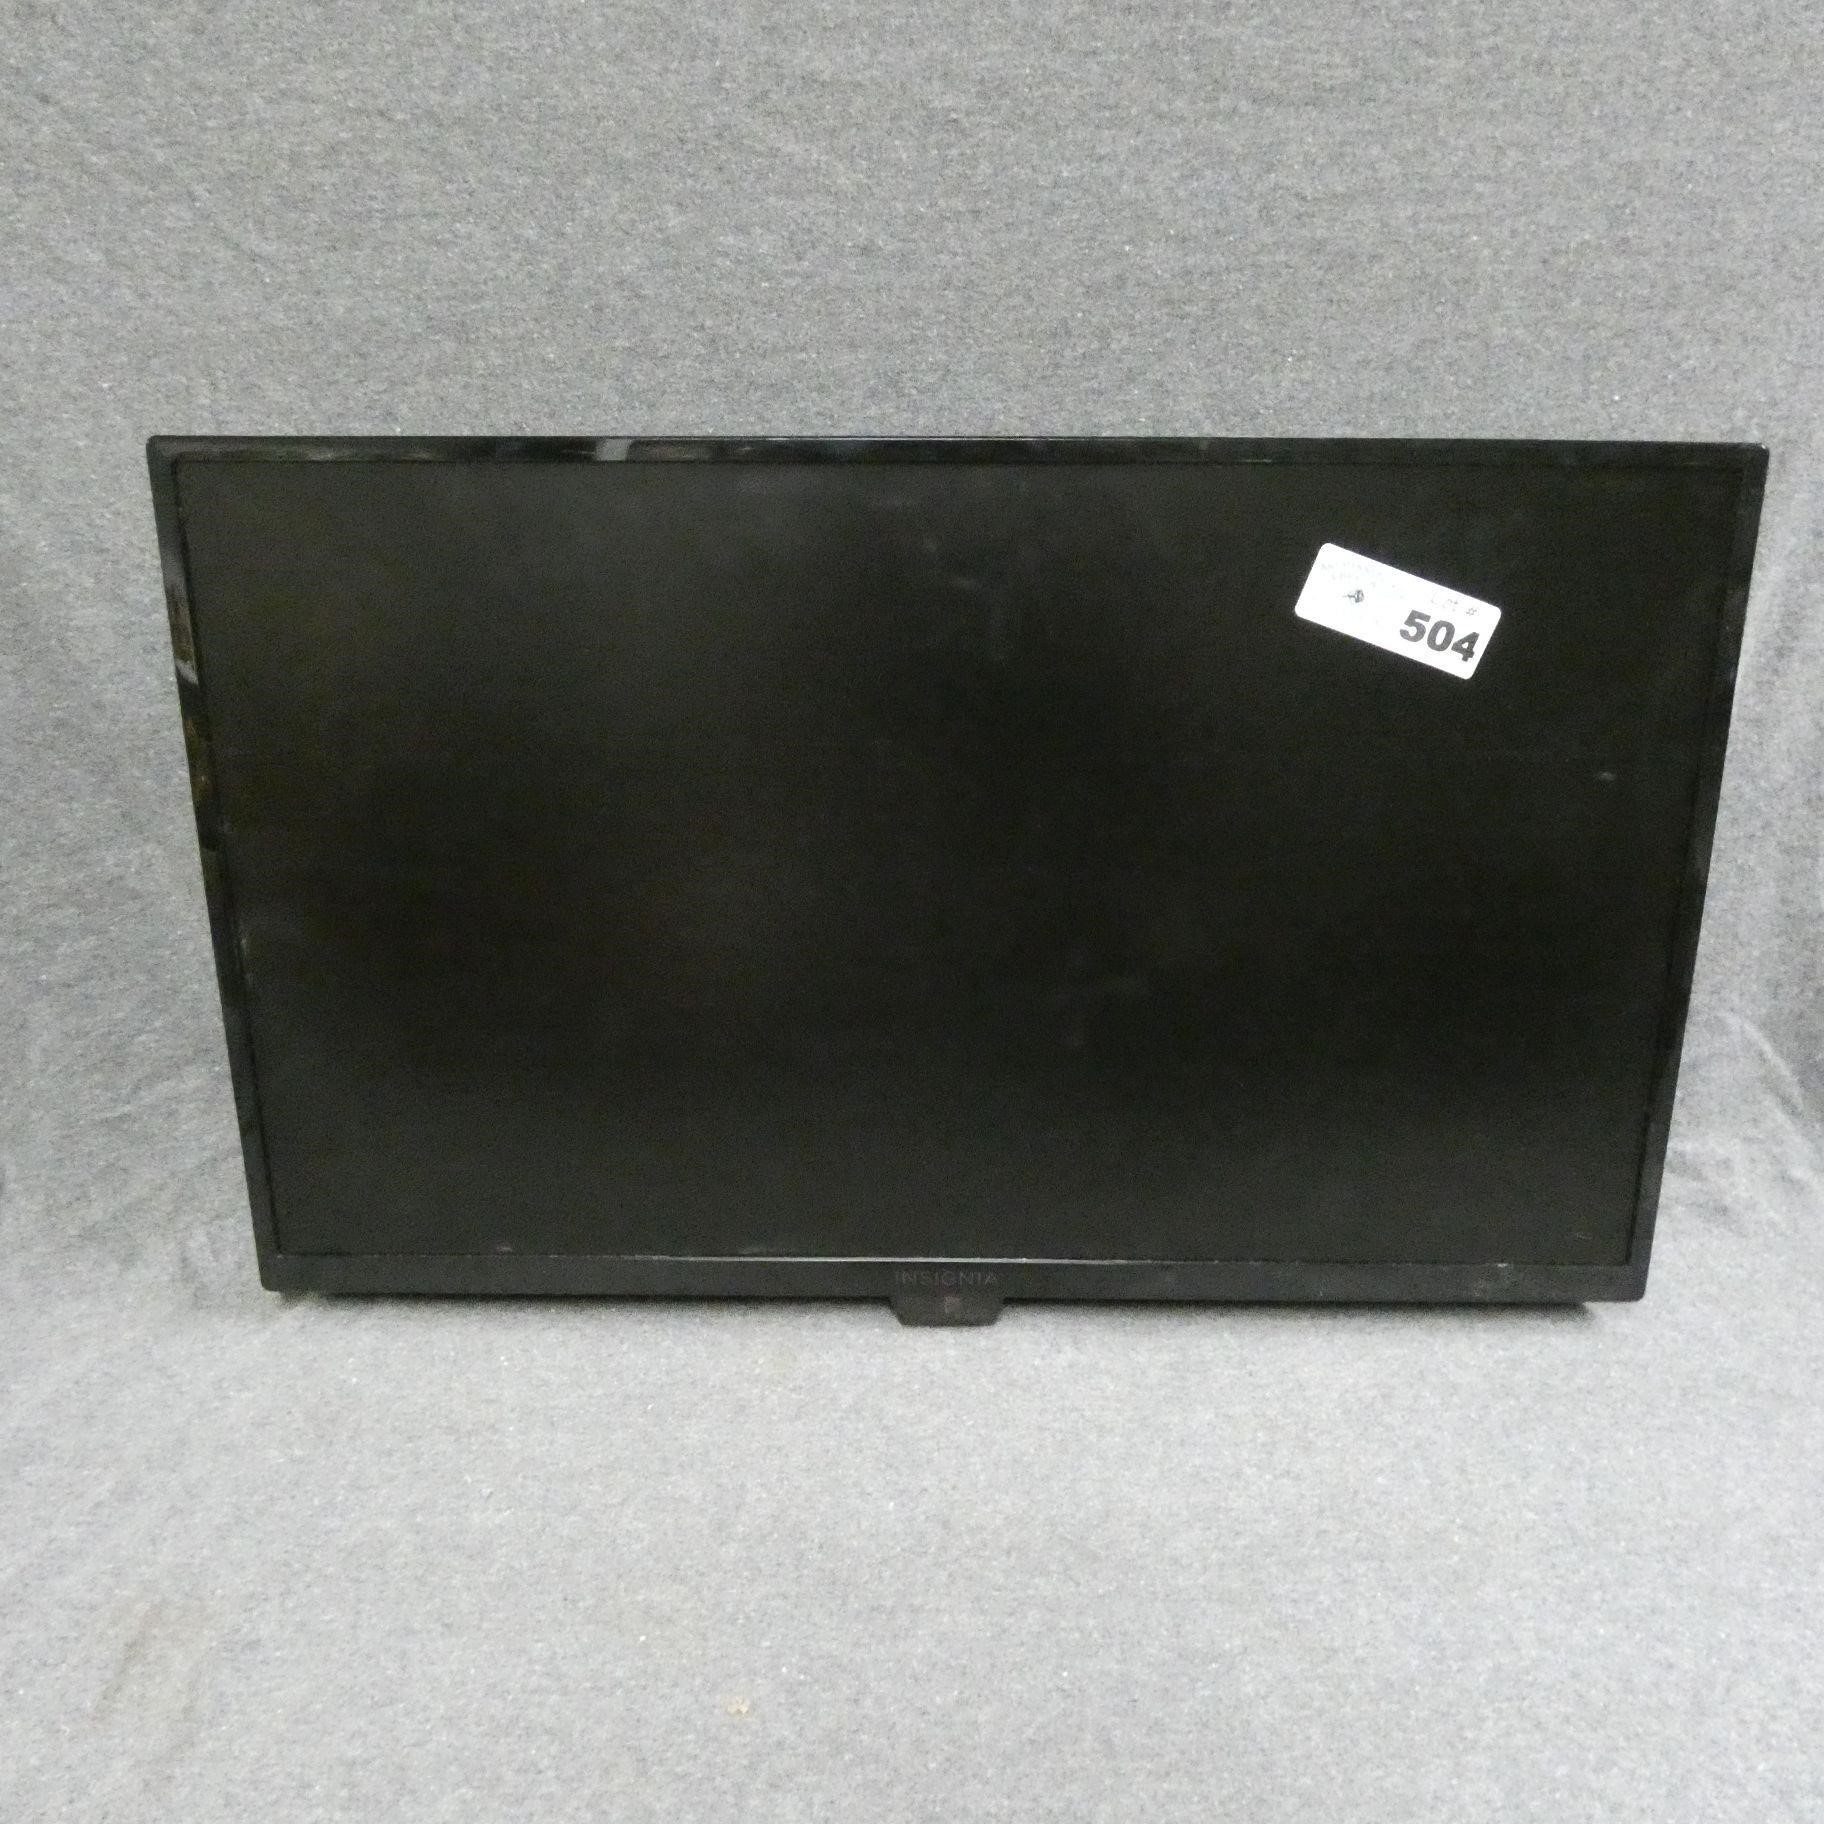 24" Insignia TV - As Is